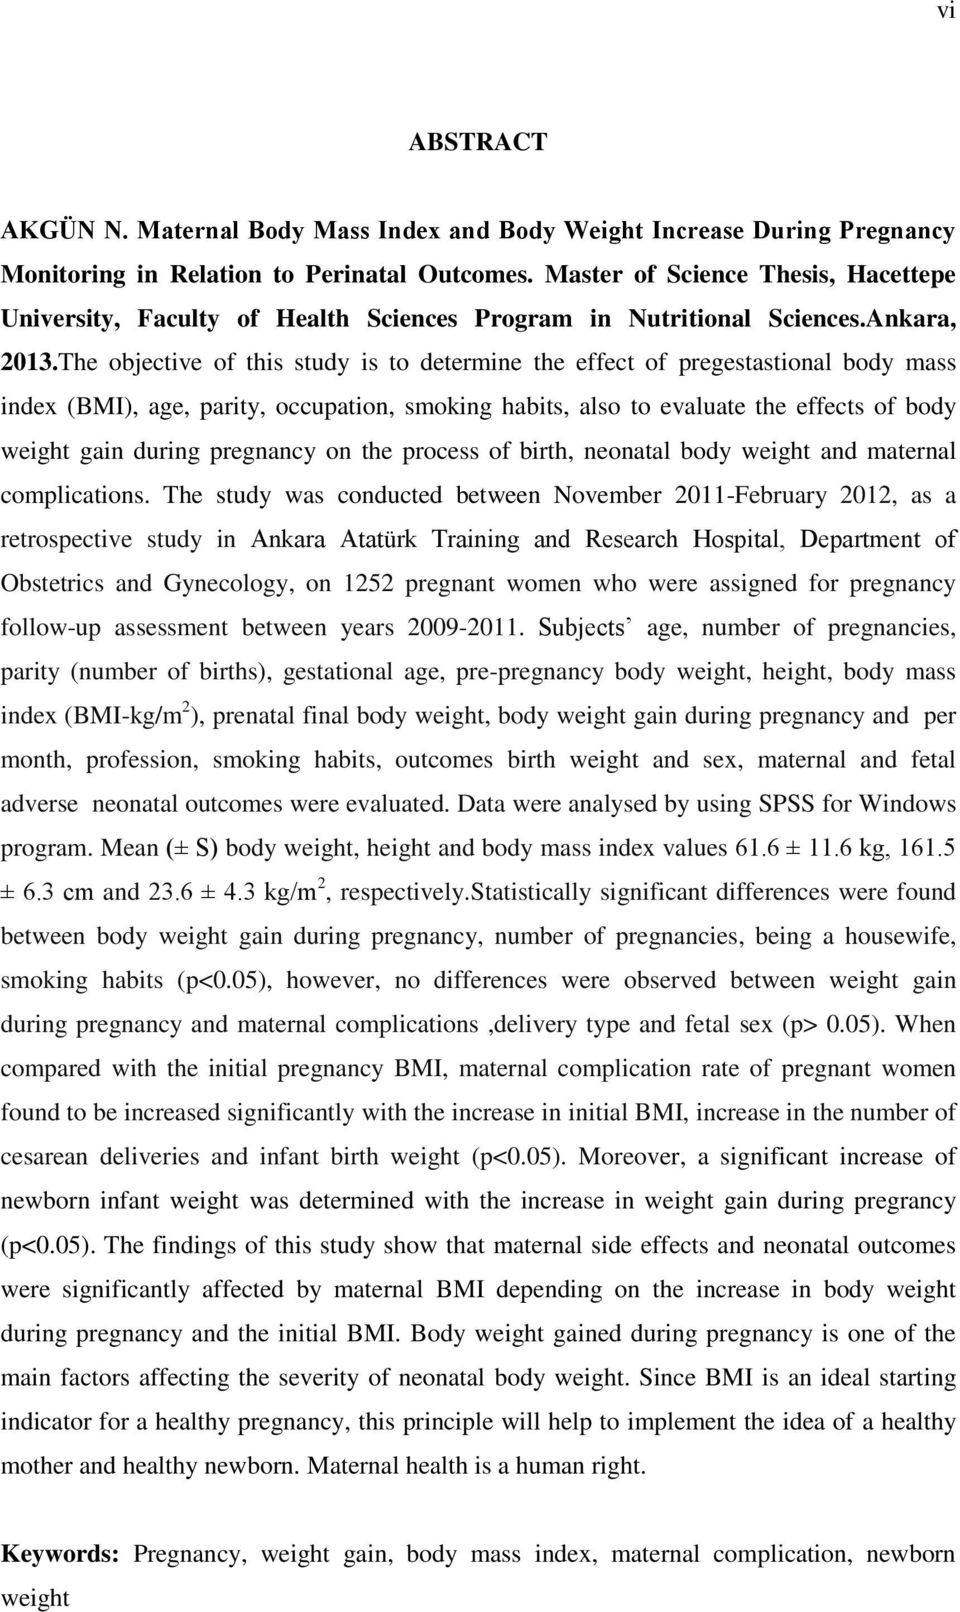 The objective of this study is to determine the effect of pregestastional body mass index (BMI), age, parity, occupation, smoking habits, also to evaluate the effects of body weight gain during